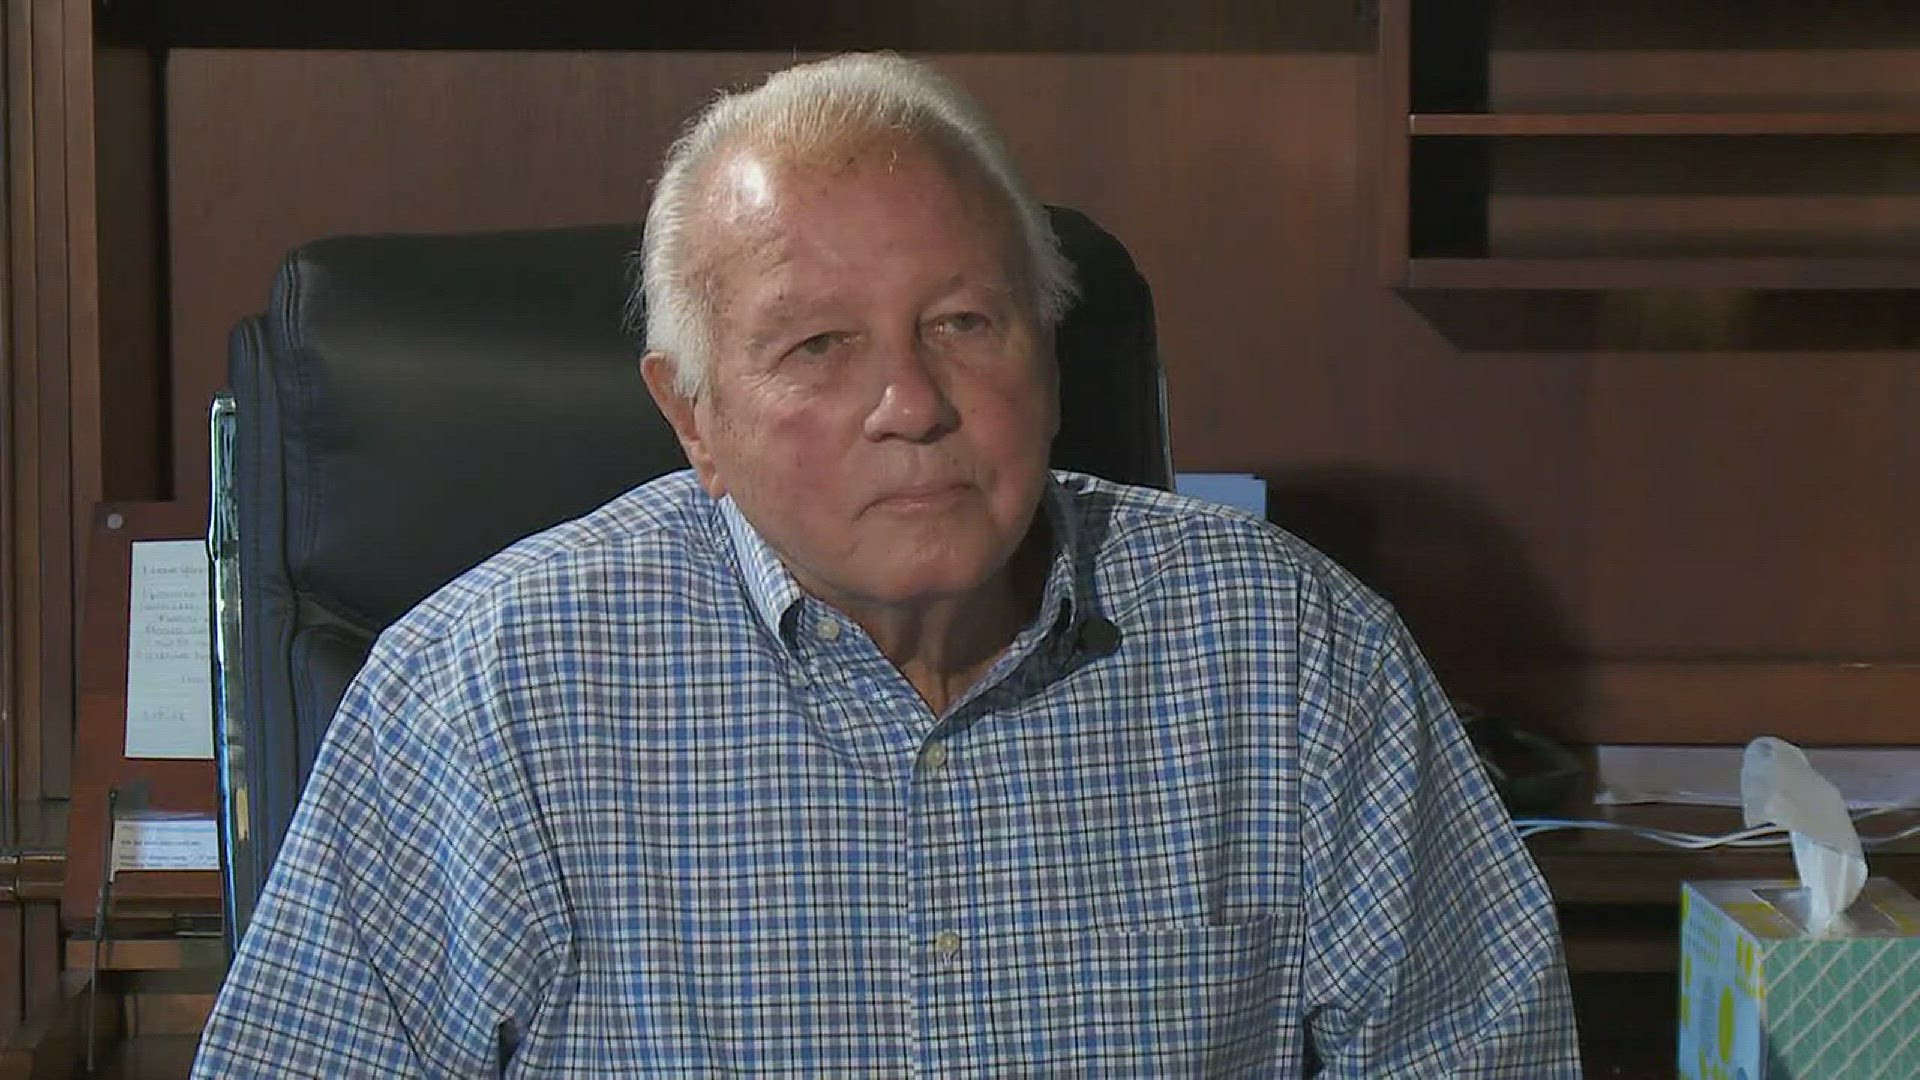 Louisiana's only four-term governor, Edwin Edwards, is turning 90-years-old on Aug. 7. To say he is a colorful character is an understatement.  Edwards, who was always dogged by controversy and investigations, was finally convicted on federal charges in 2